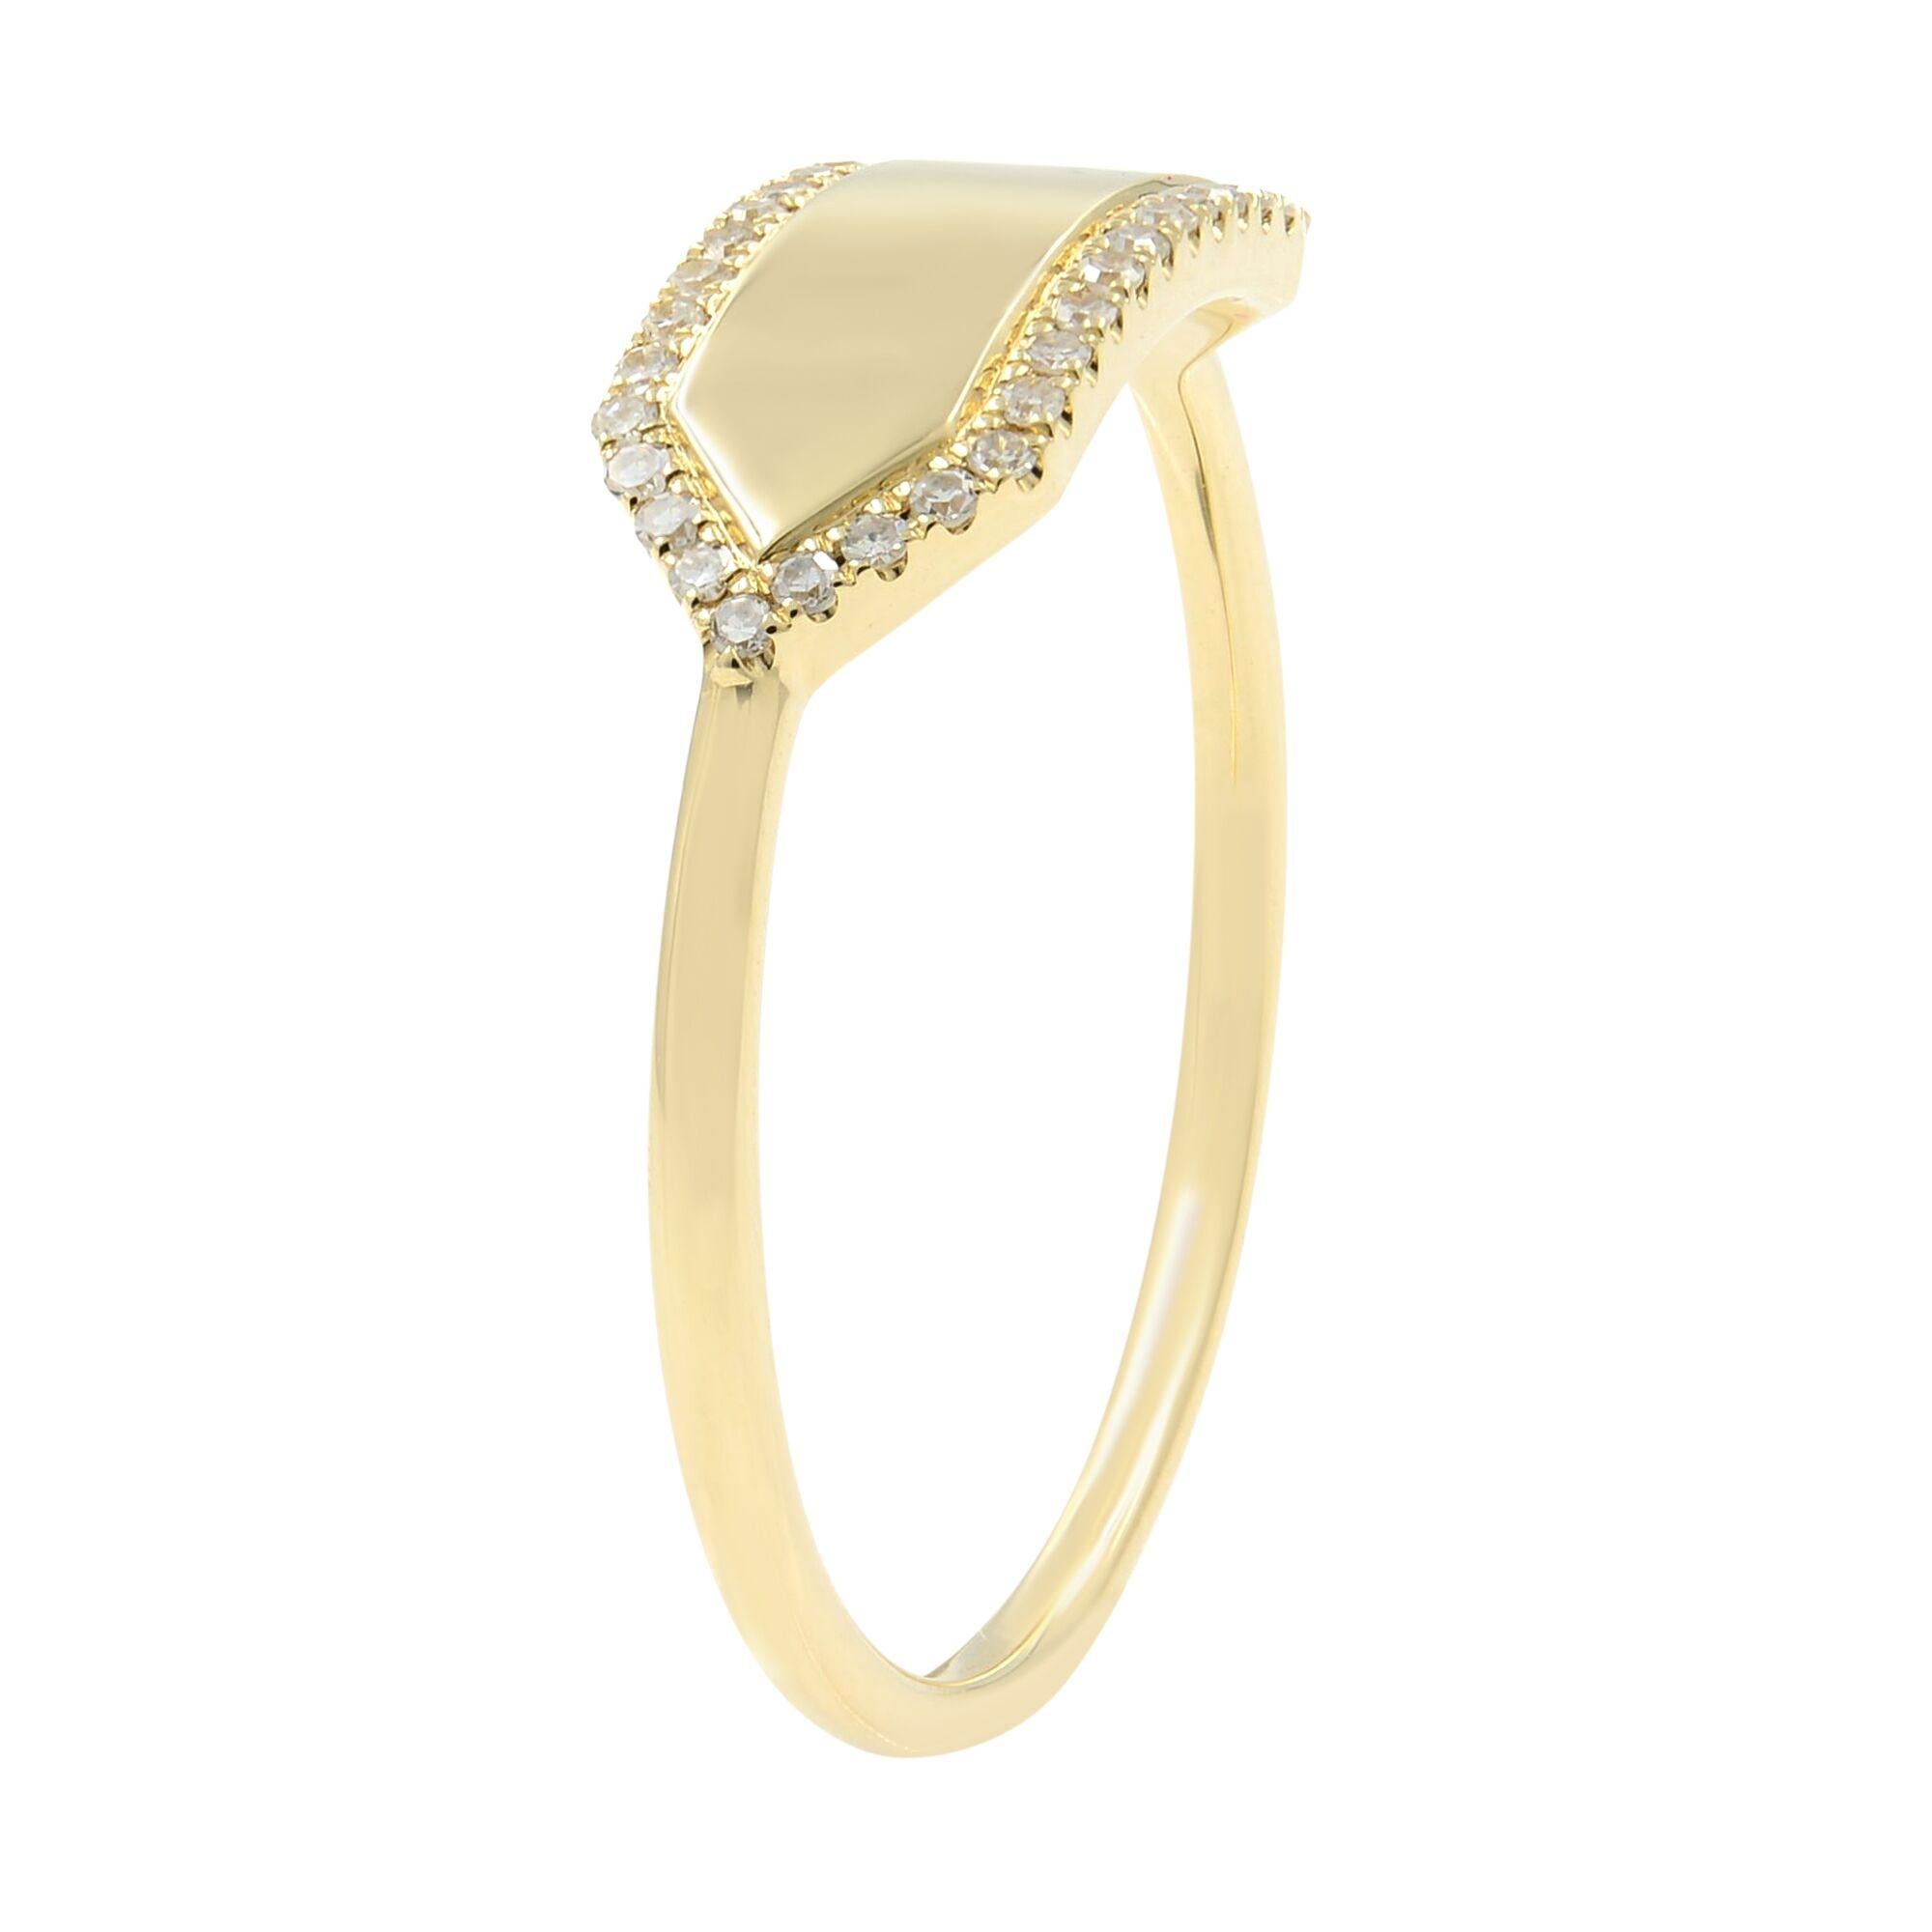 Beautifully handcrafted 14k solid yellow gold pave diamond nameplate ring. Think of an engraving of your choice and any local jeweler can easily apply it. Chic and timeless, wear it solo or stacked, this custom ring is a must-have, available in 14k